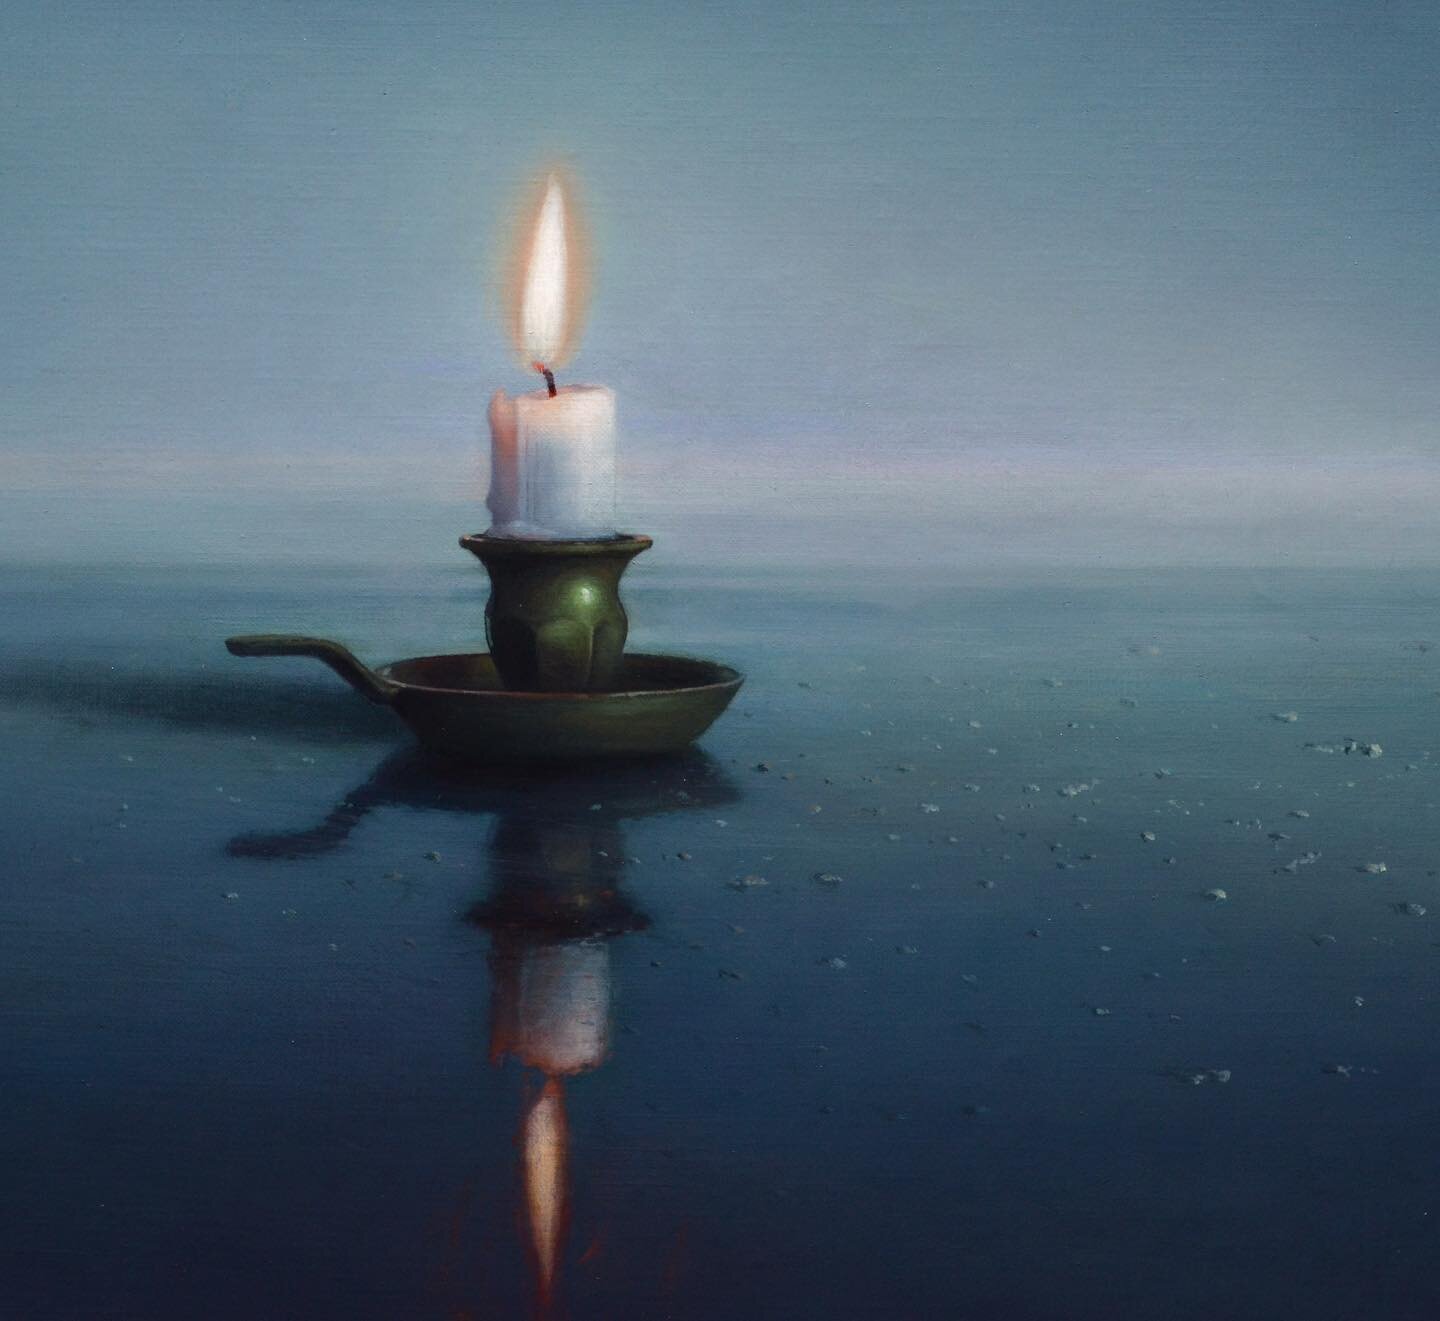 Candle and Dust, oil on linen mounted to aluminum panel, 22&rdquo; x 24&rdquo;
.
swipe to see the full image
.
This painting will soon be on its way to a collector @winfieldgallery gallery in CA.  Stay tuned for some new still lives this month and a 